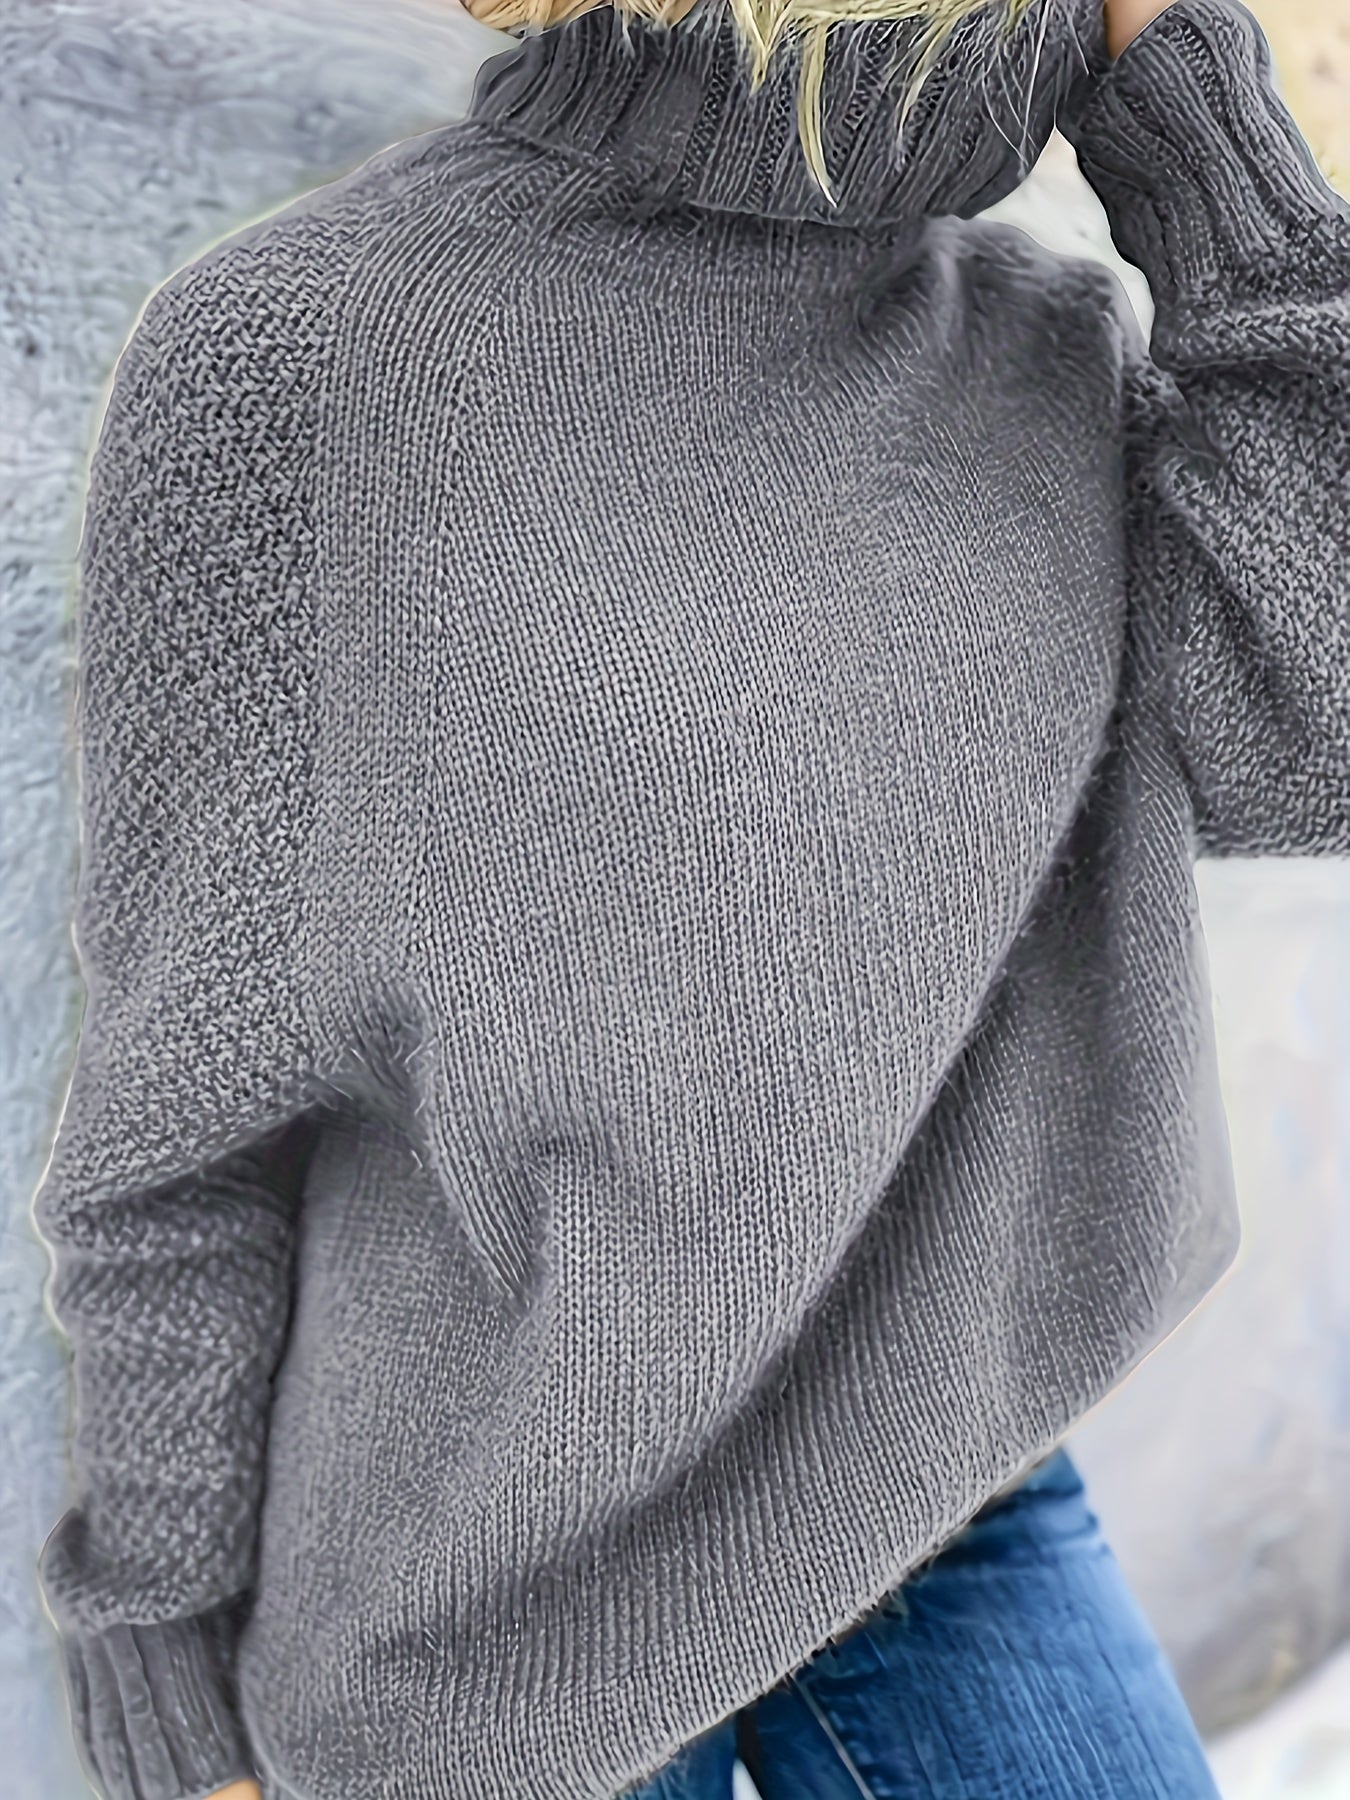 Solid Turtle Neck Loose Pullover Sweater, Casual Long Sleeve Raglan Shoulder Sweater, Women's Clothing